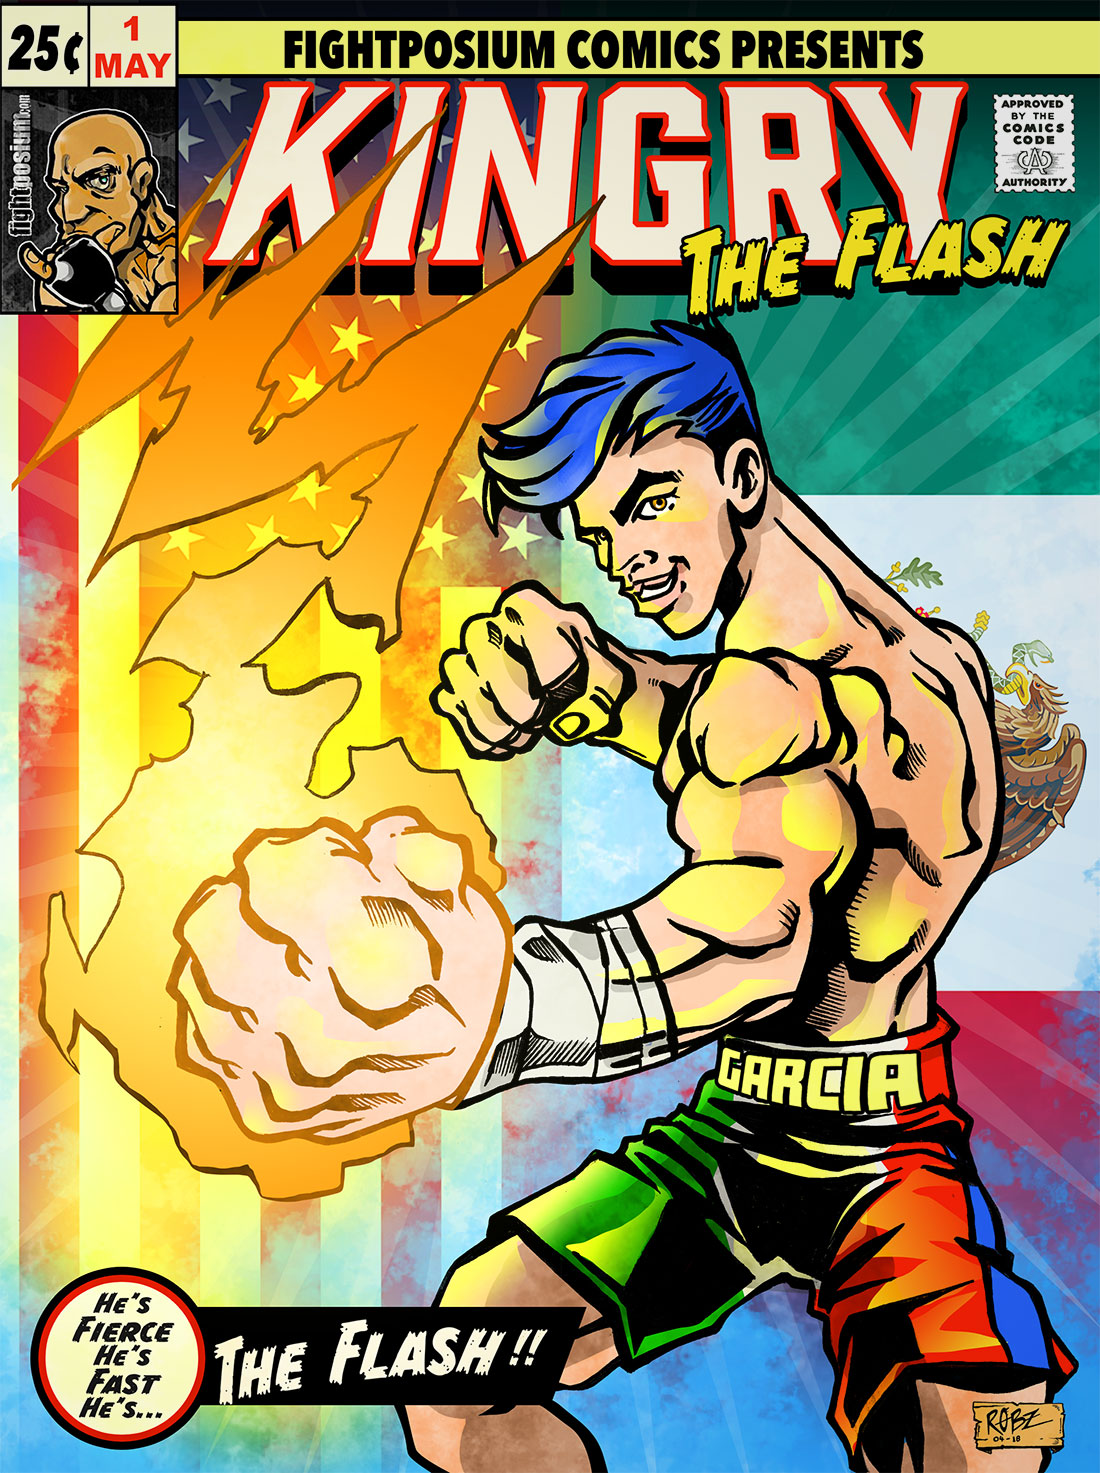 You are currently viewing Ryan “The Flash” Garcia – KingRy